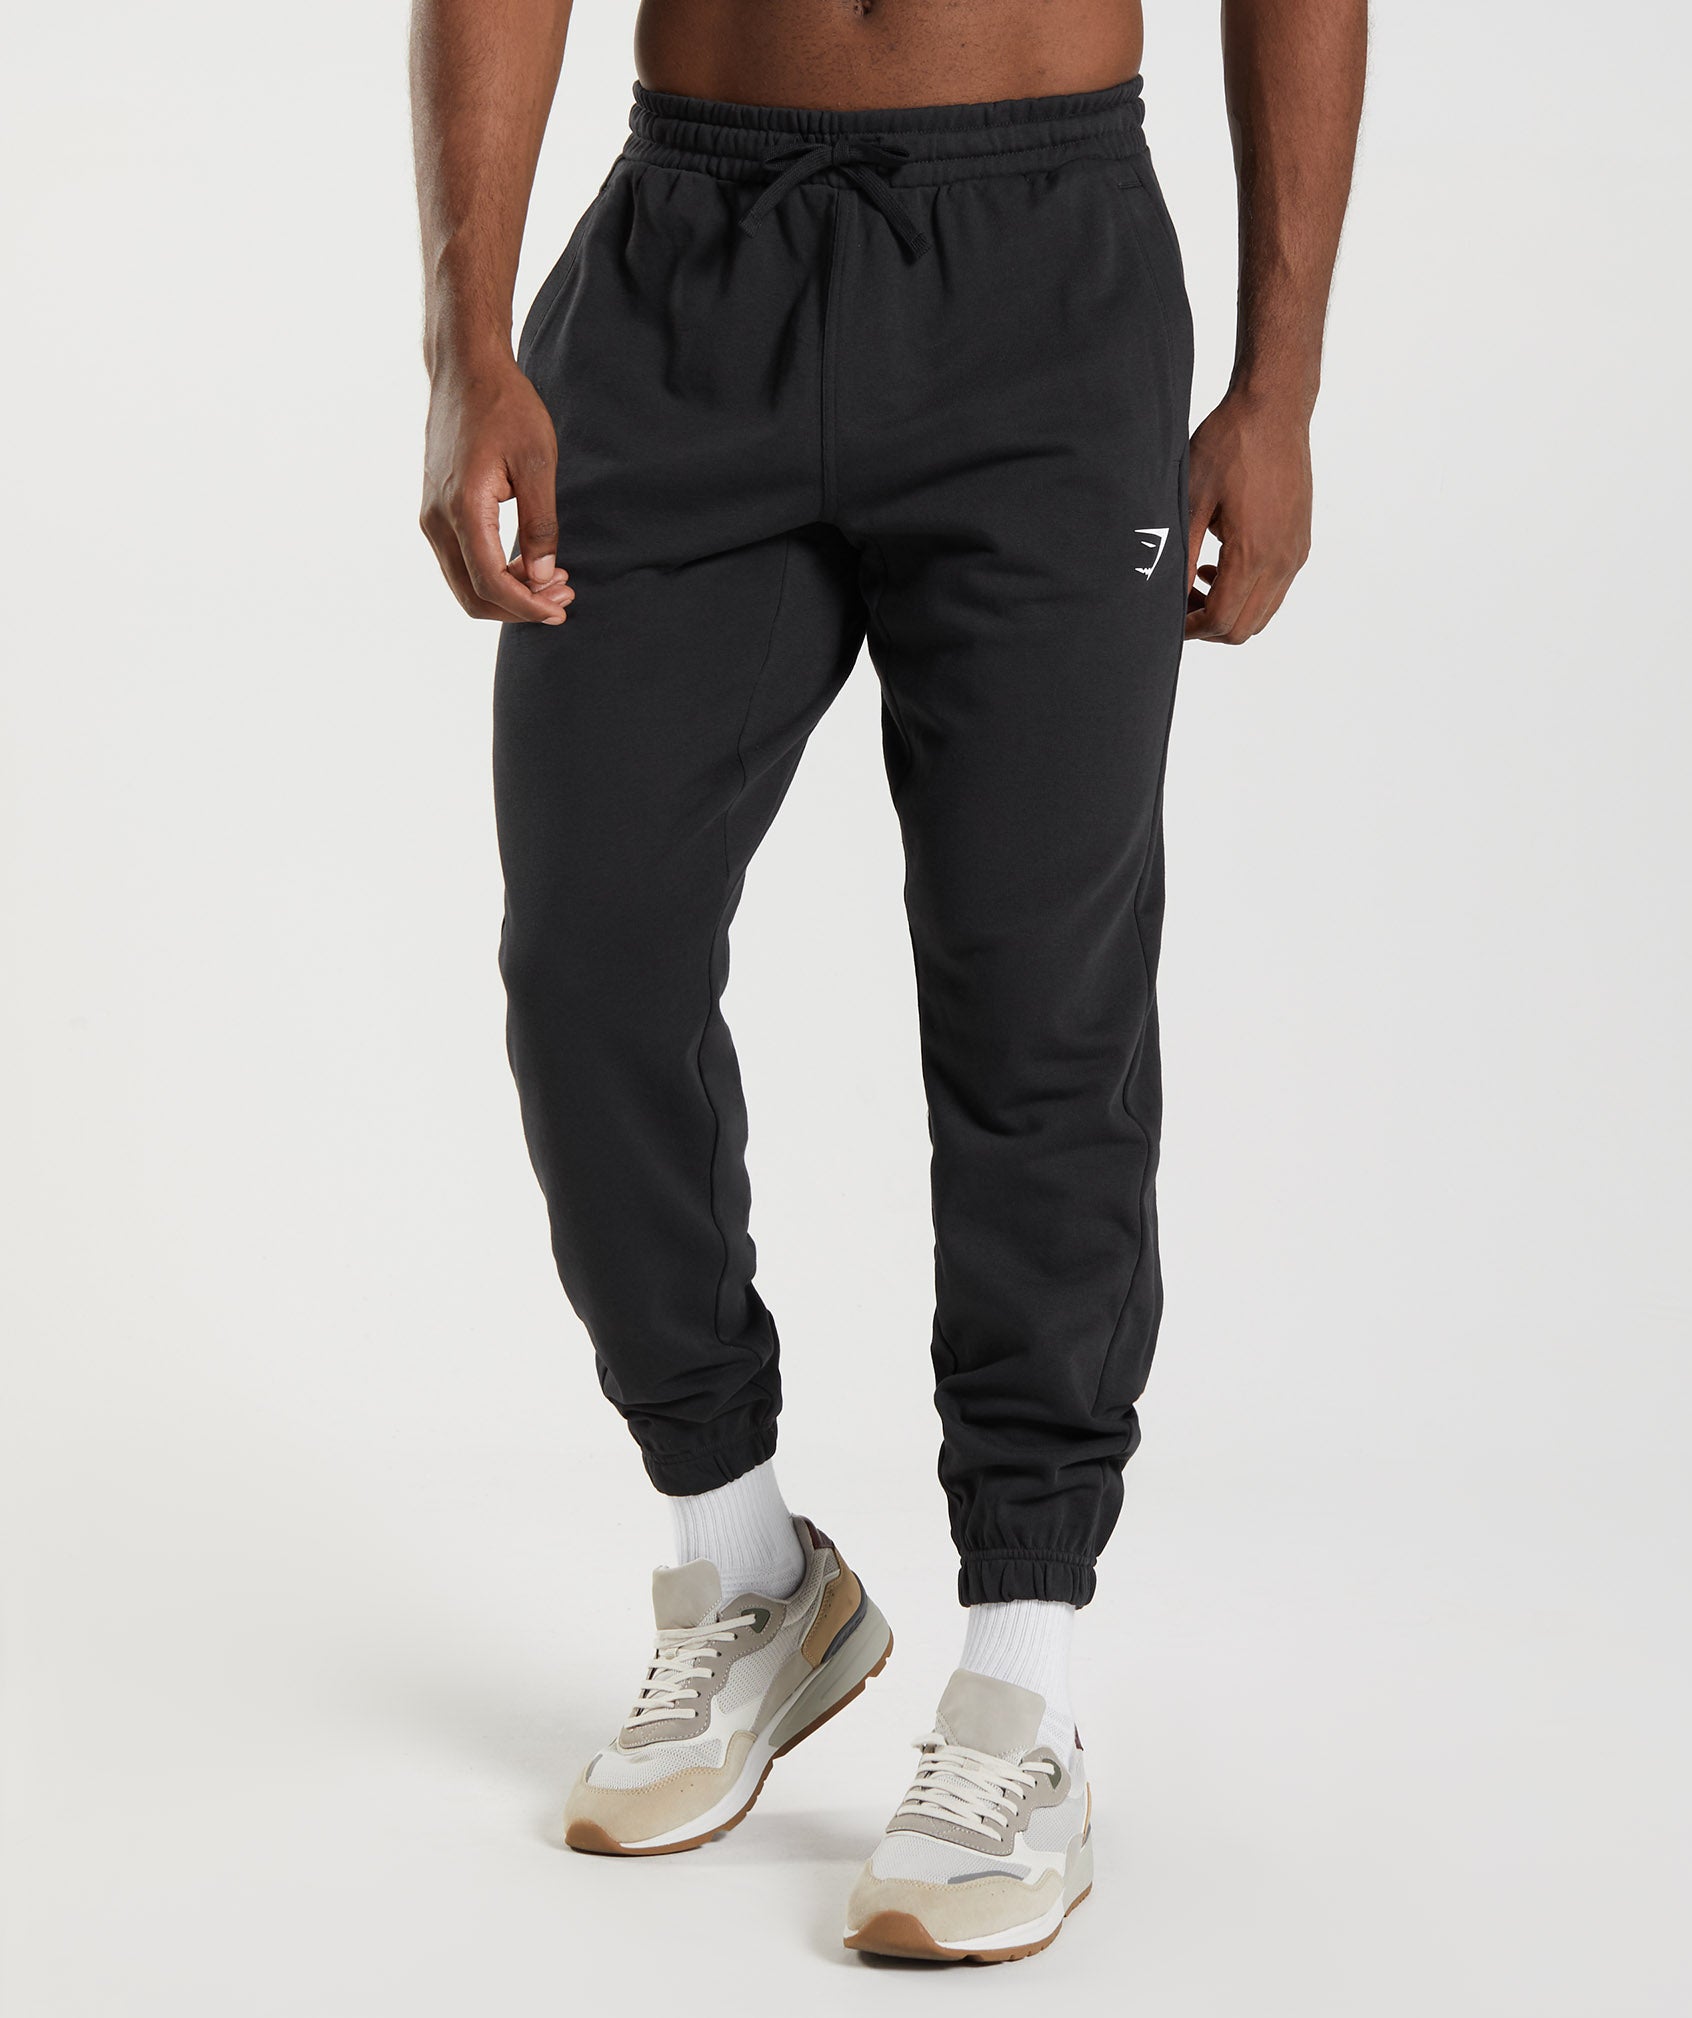 Trousers & Sweatpants, Gym Trousers